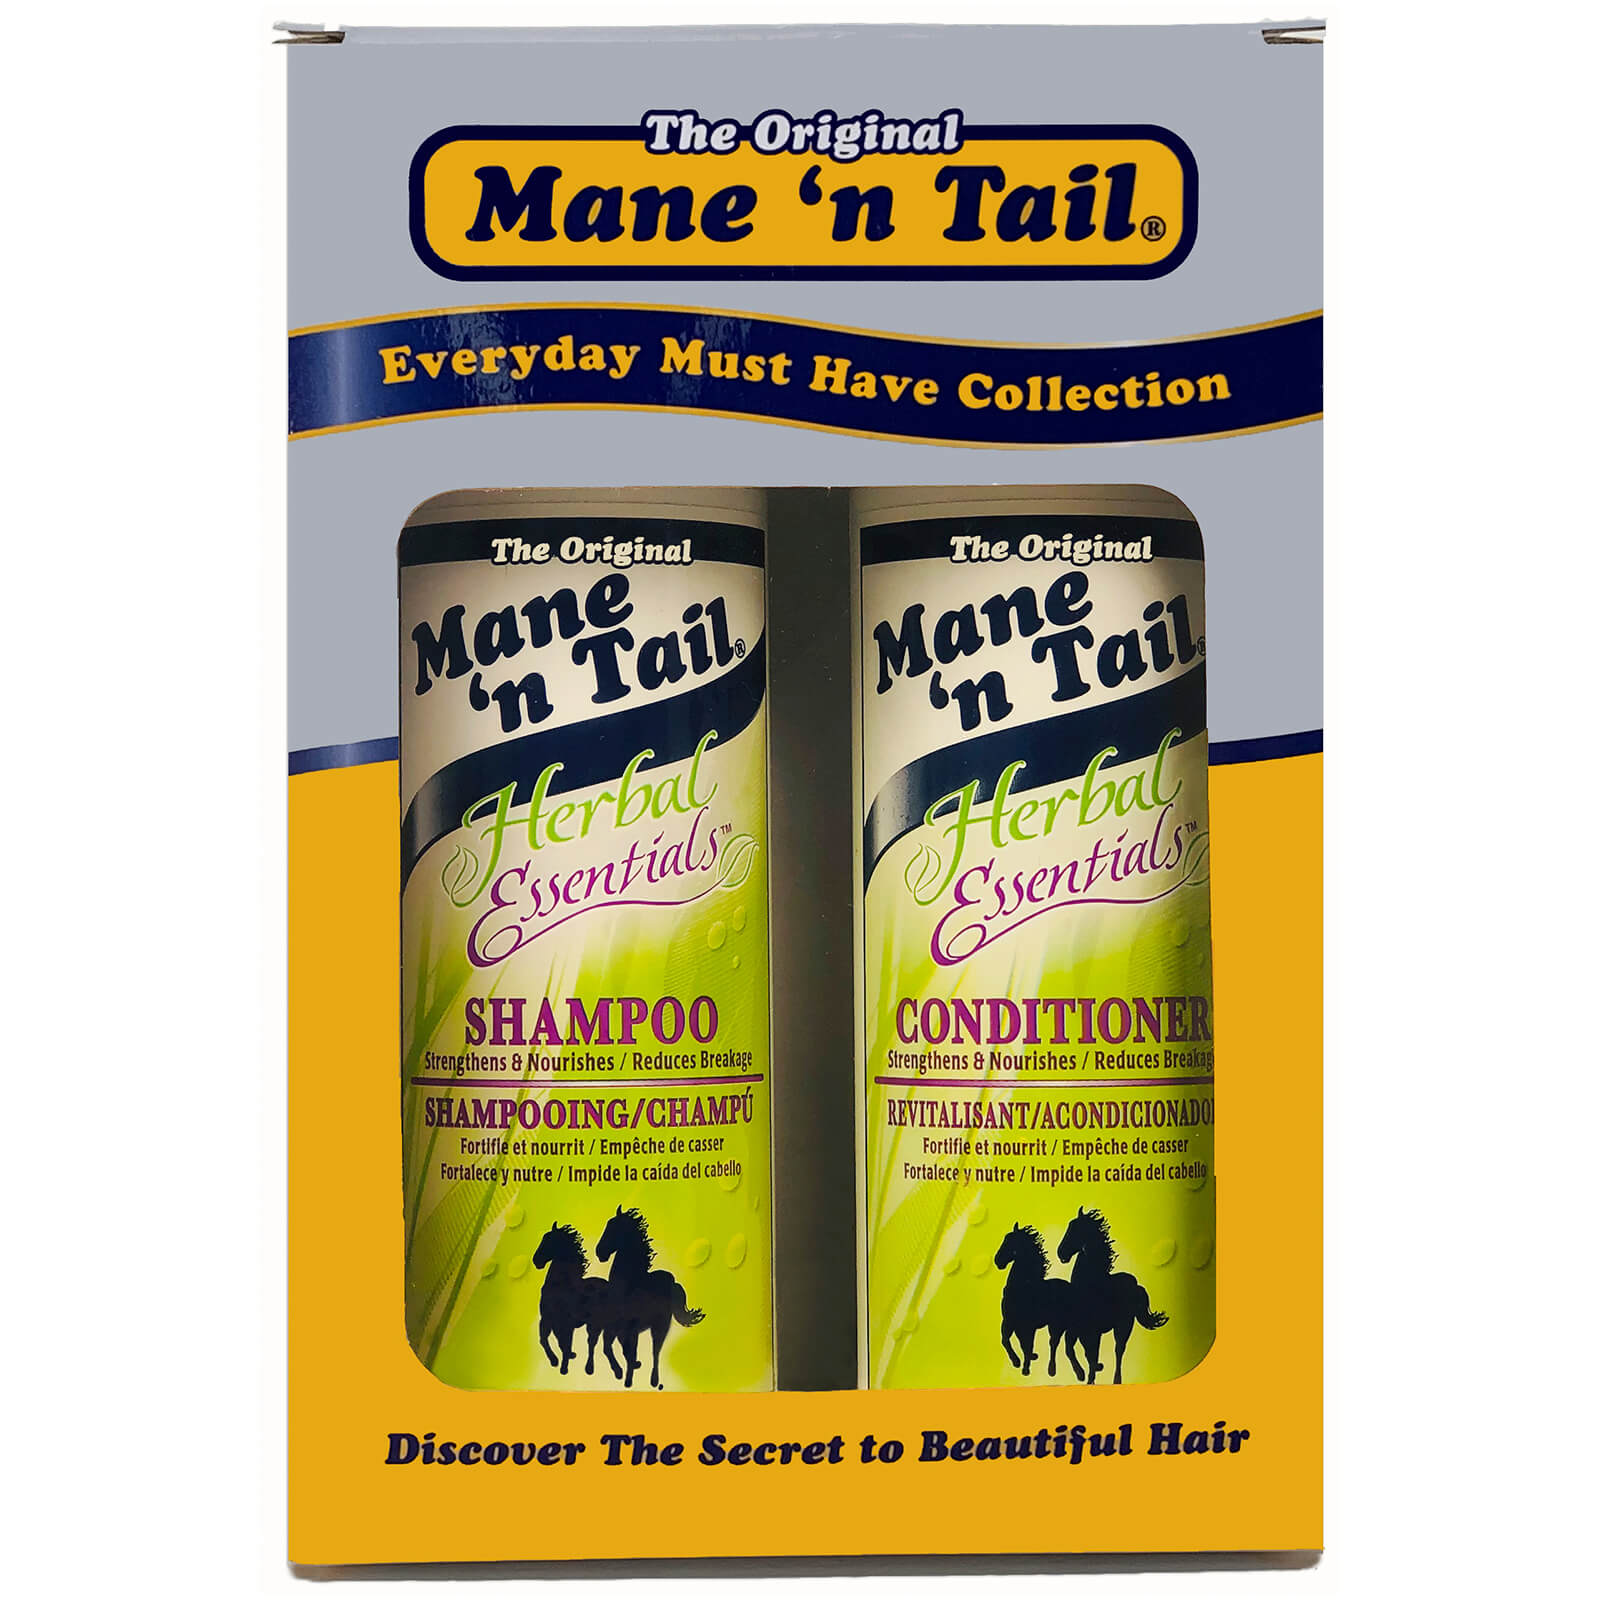 Mane 'n Tail Everyday Must Have Collection - Herbal Essentials